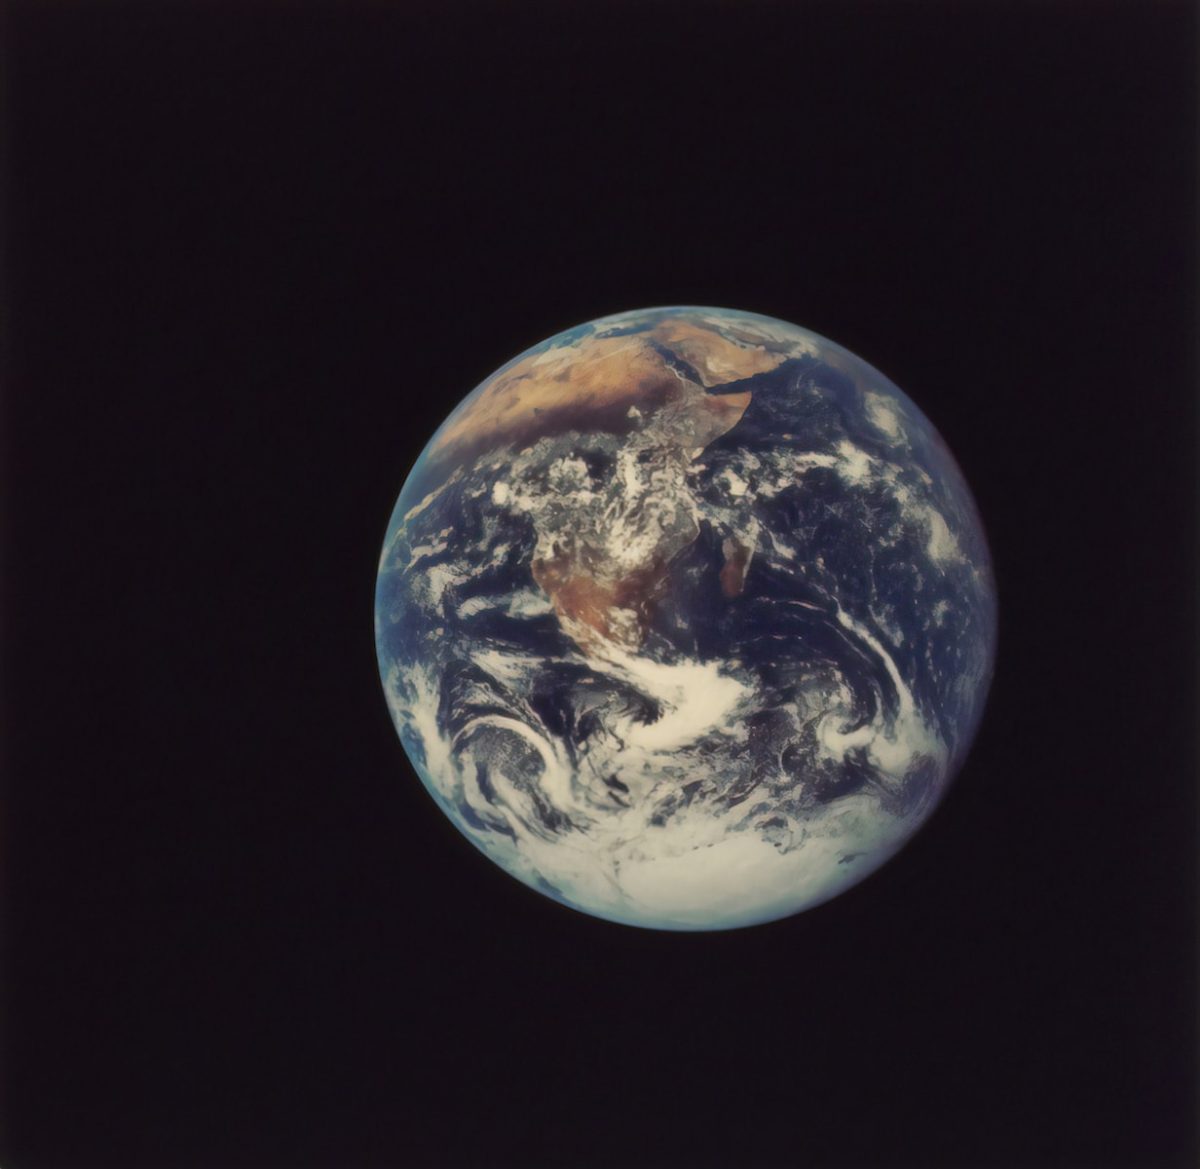 planet+earth+close-up+photography